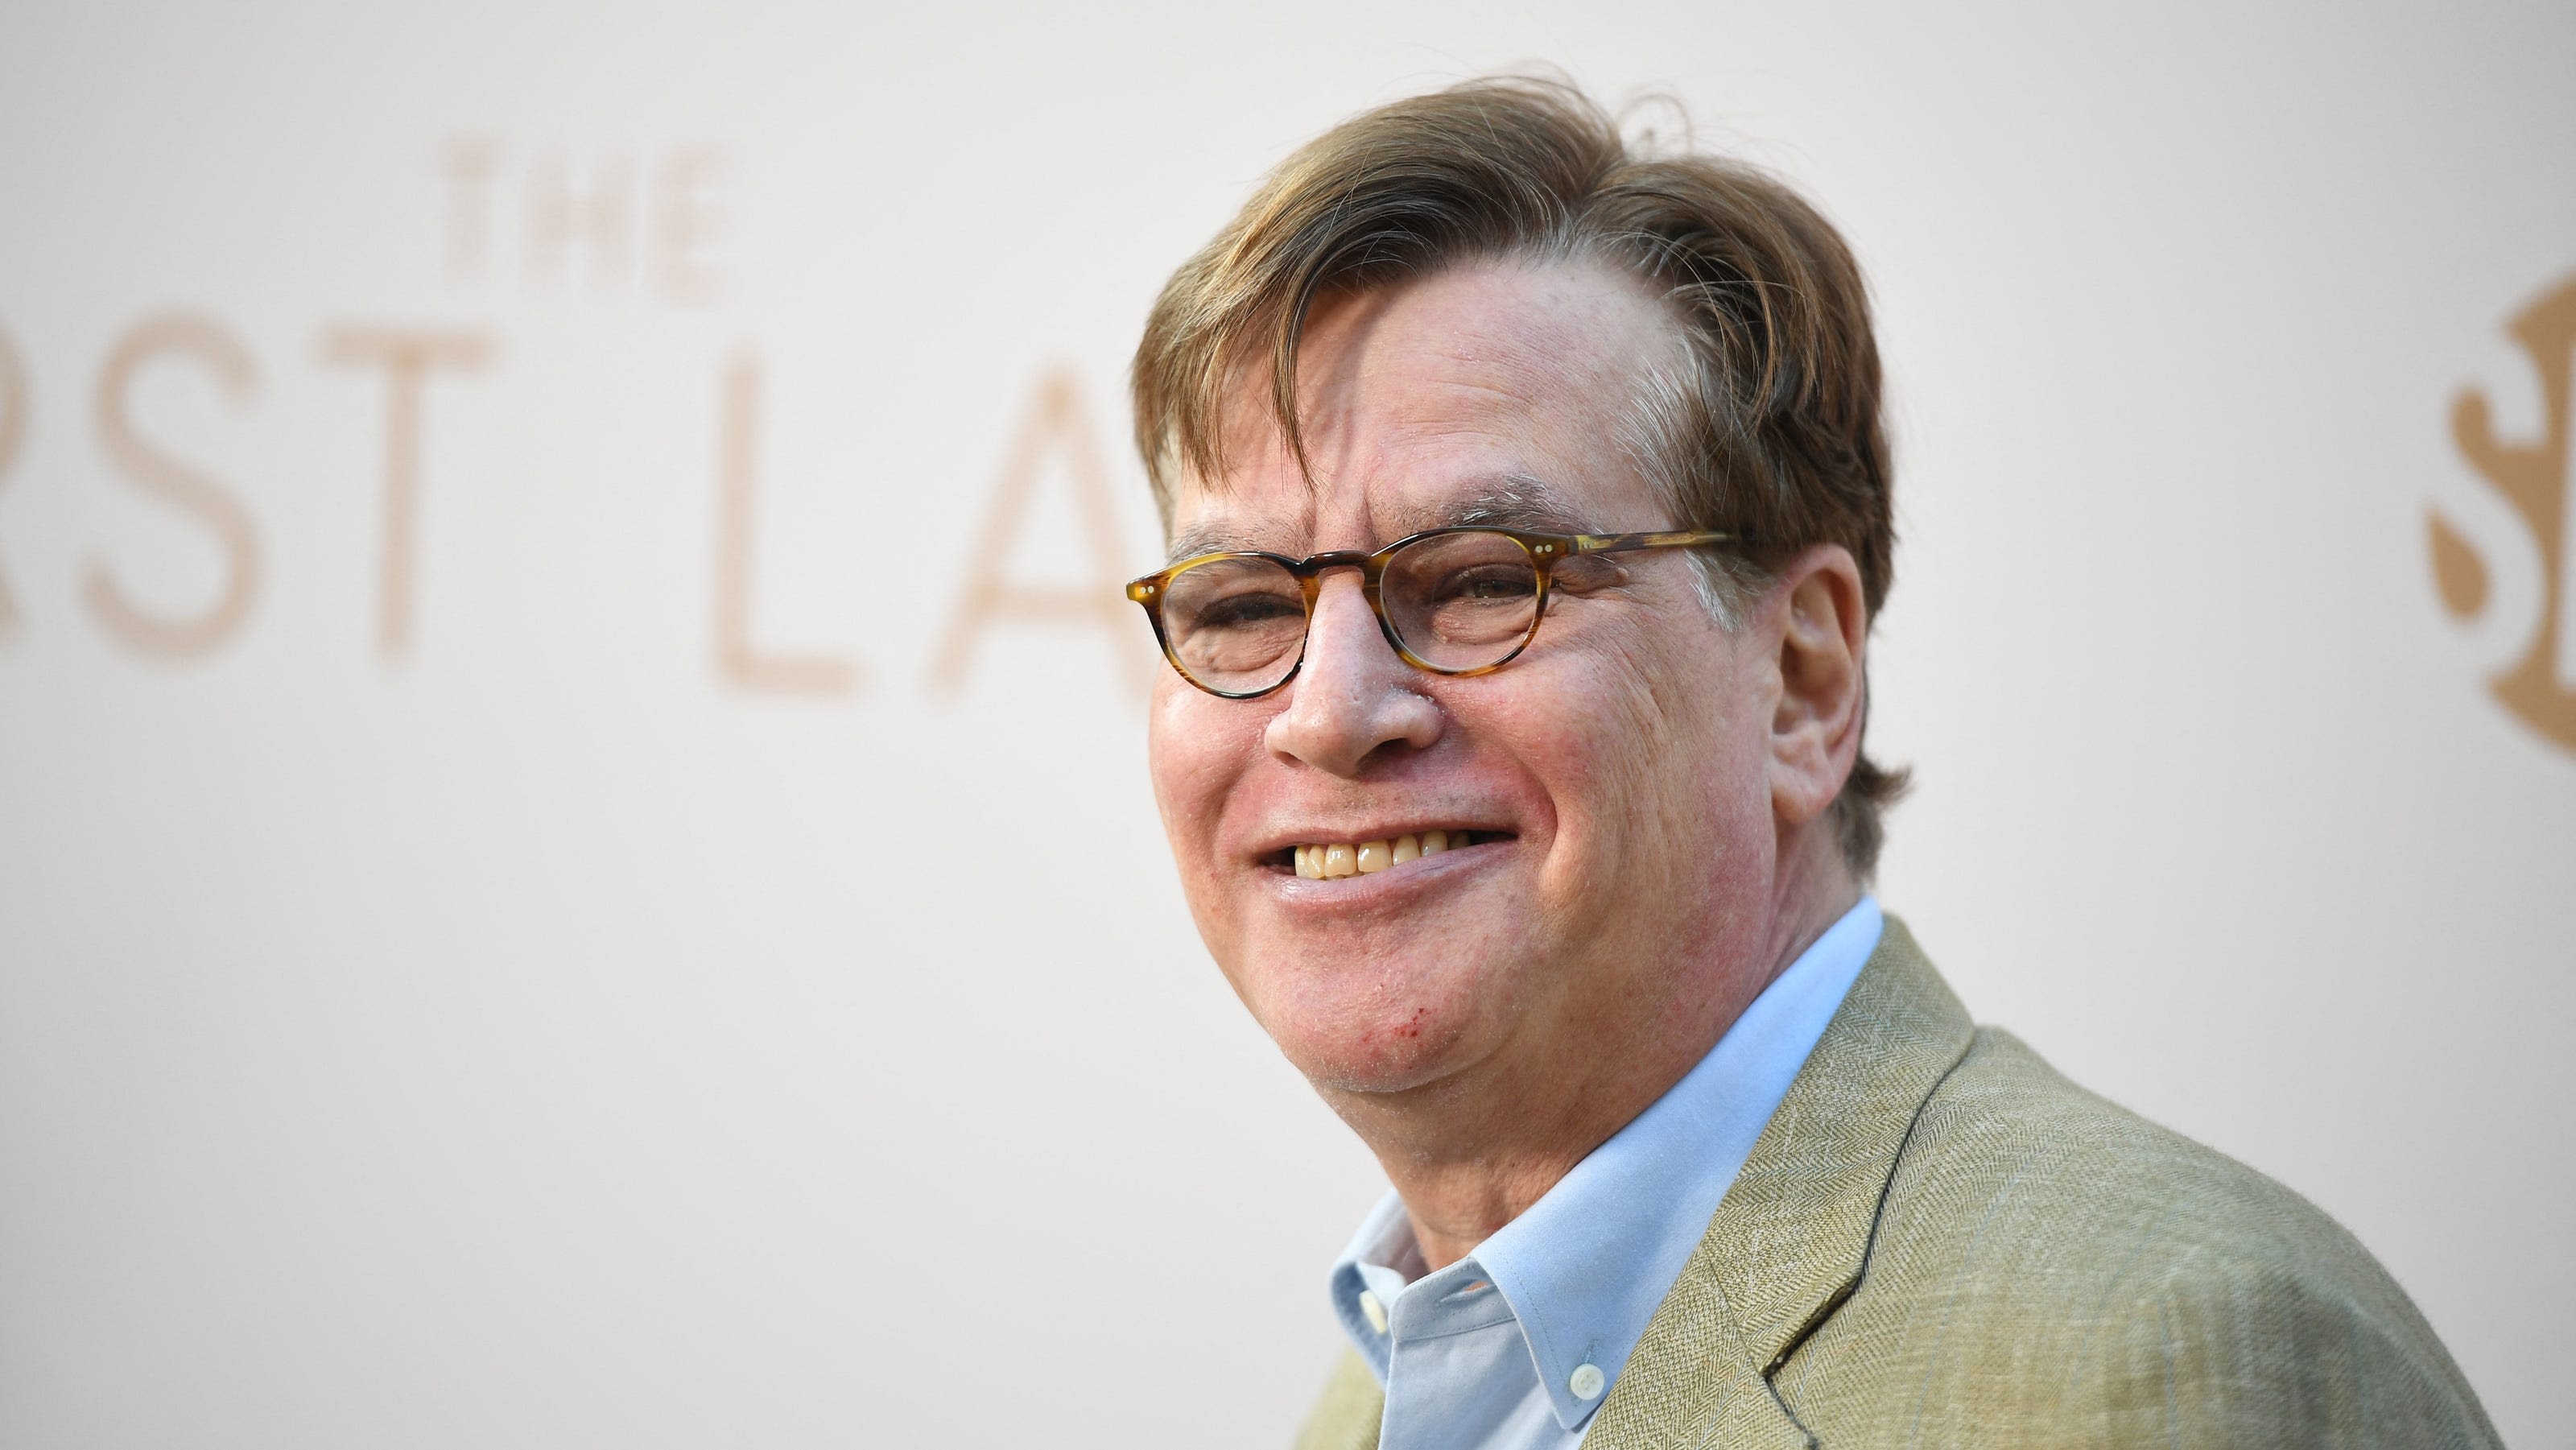 'West Wing' creator Aaron Sorkin takes back suggestion for Democrats to nominate Mitt Romney